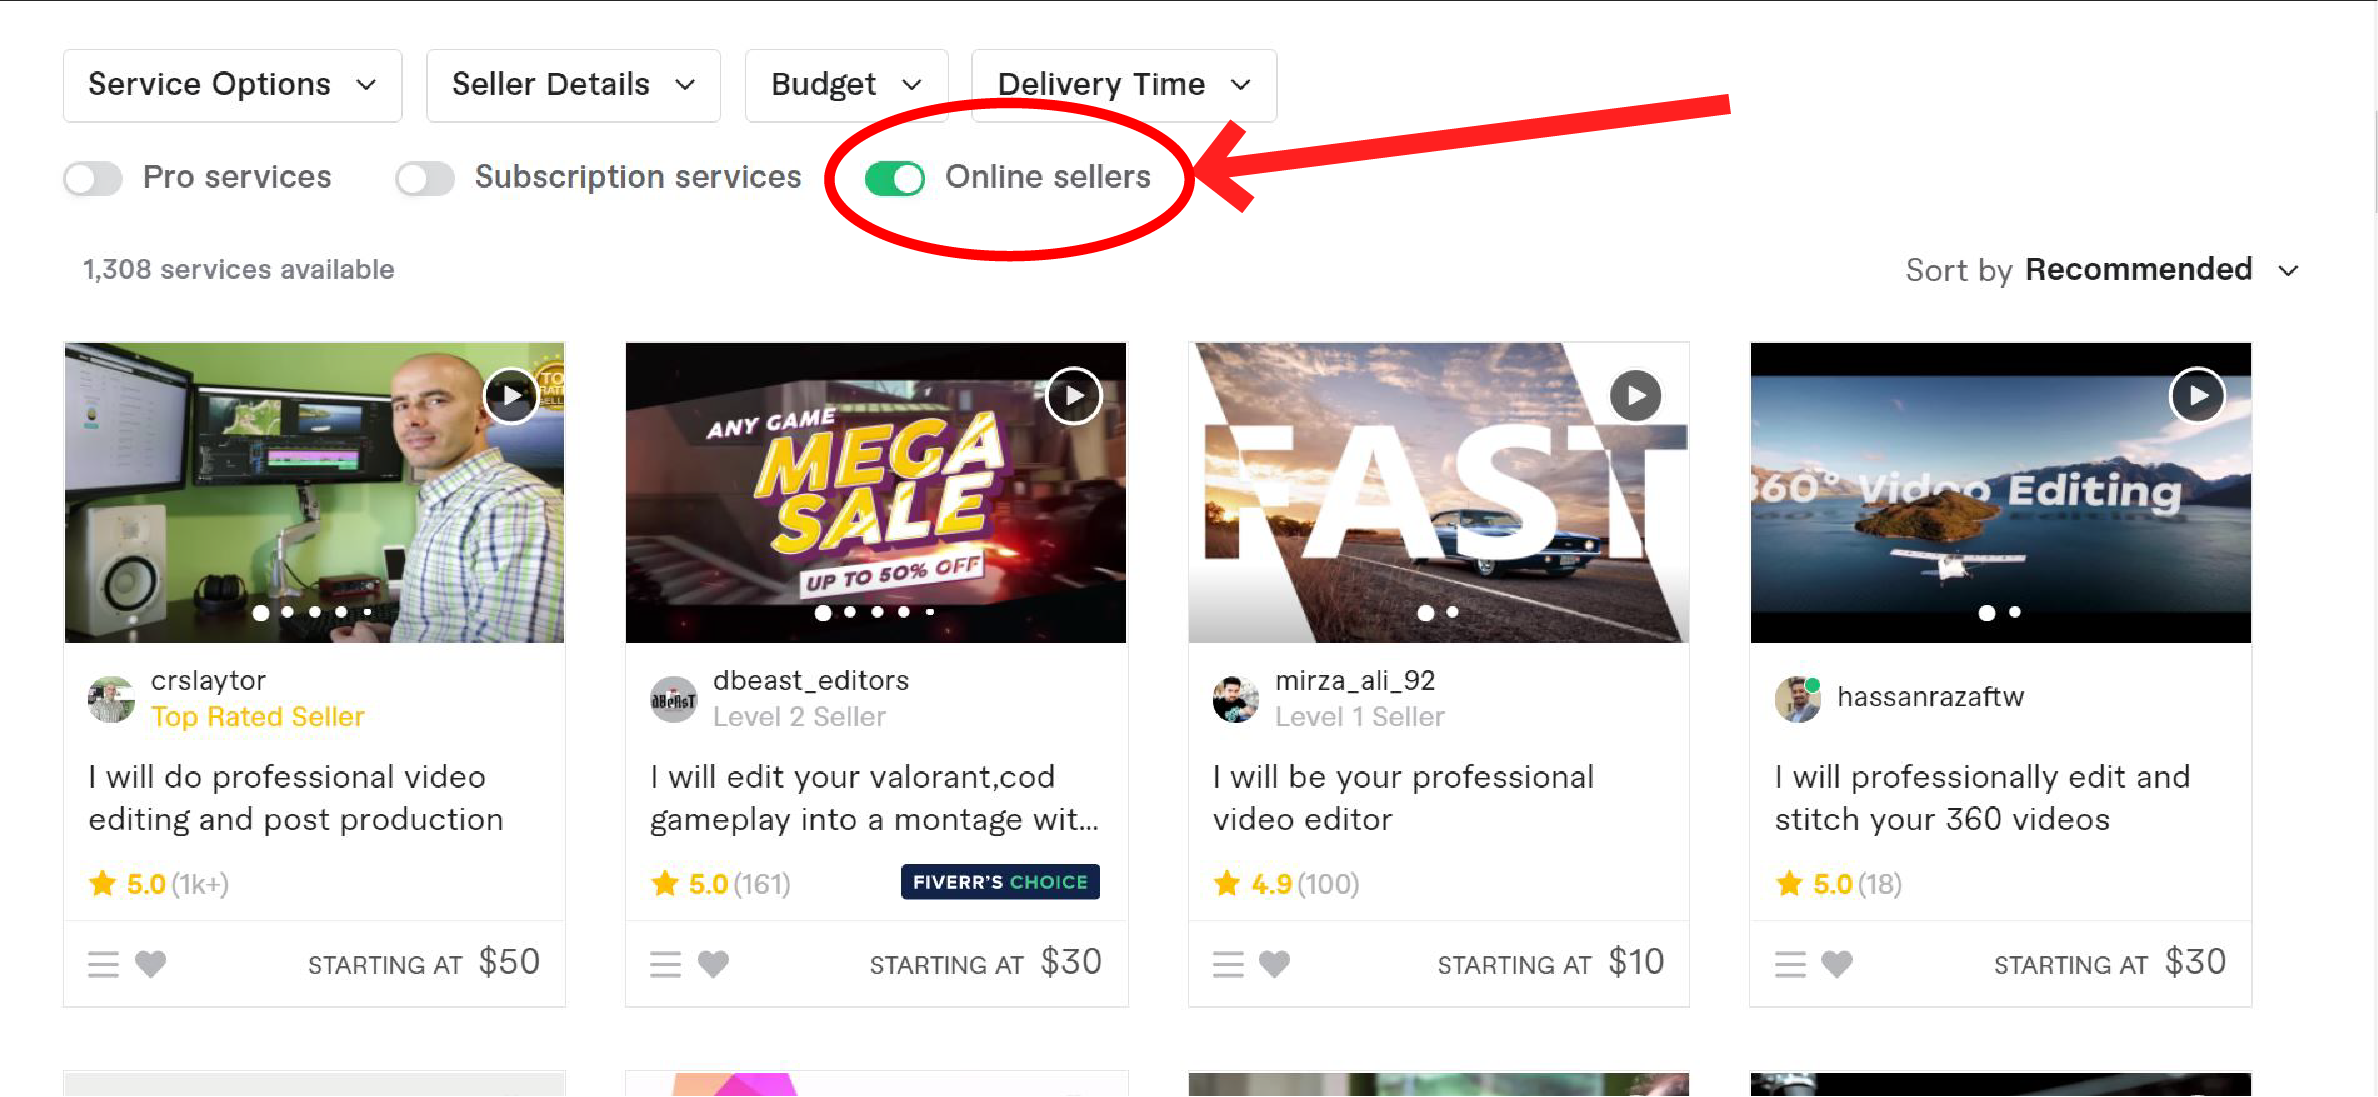 7 hard ways to get the first order on Fiverr - 2021